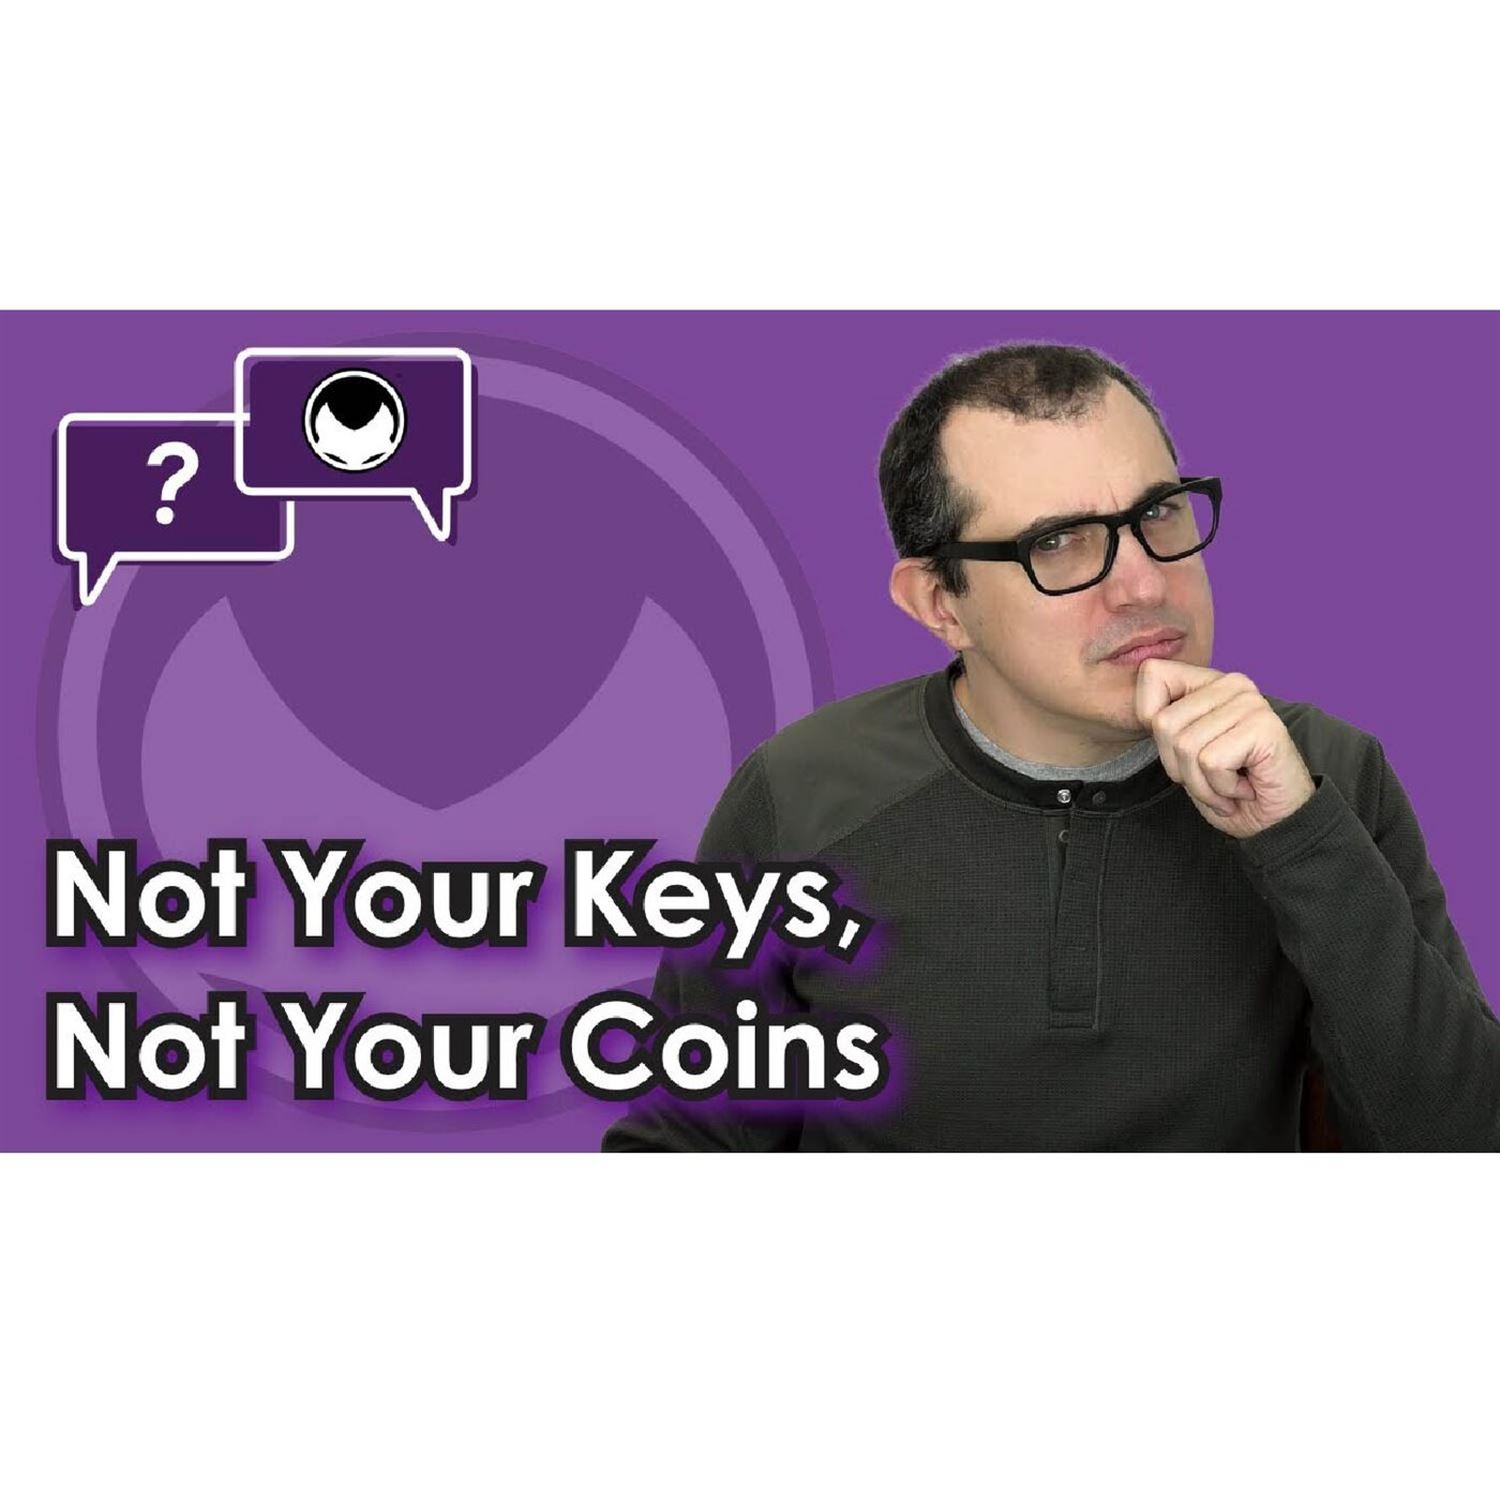 Not your keys, not your coins